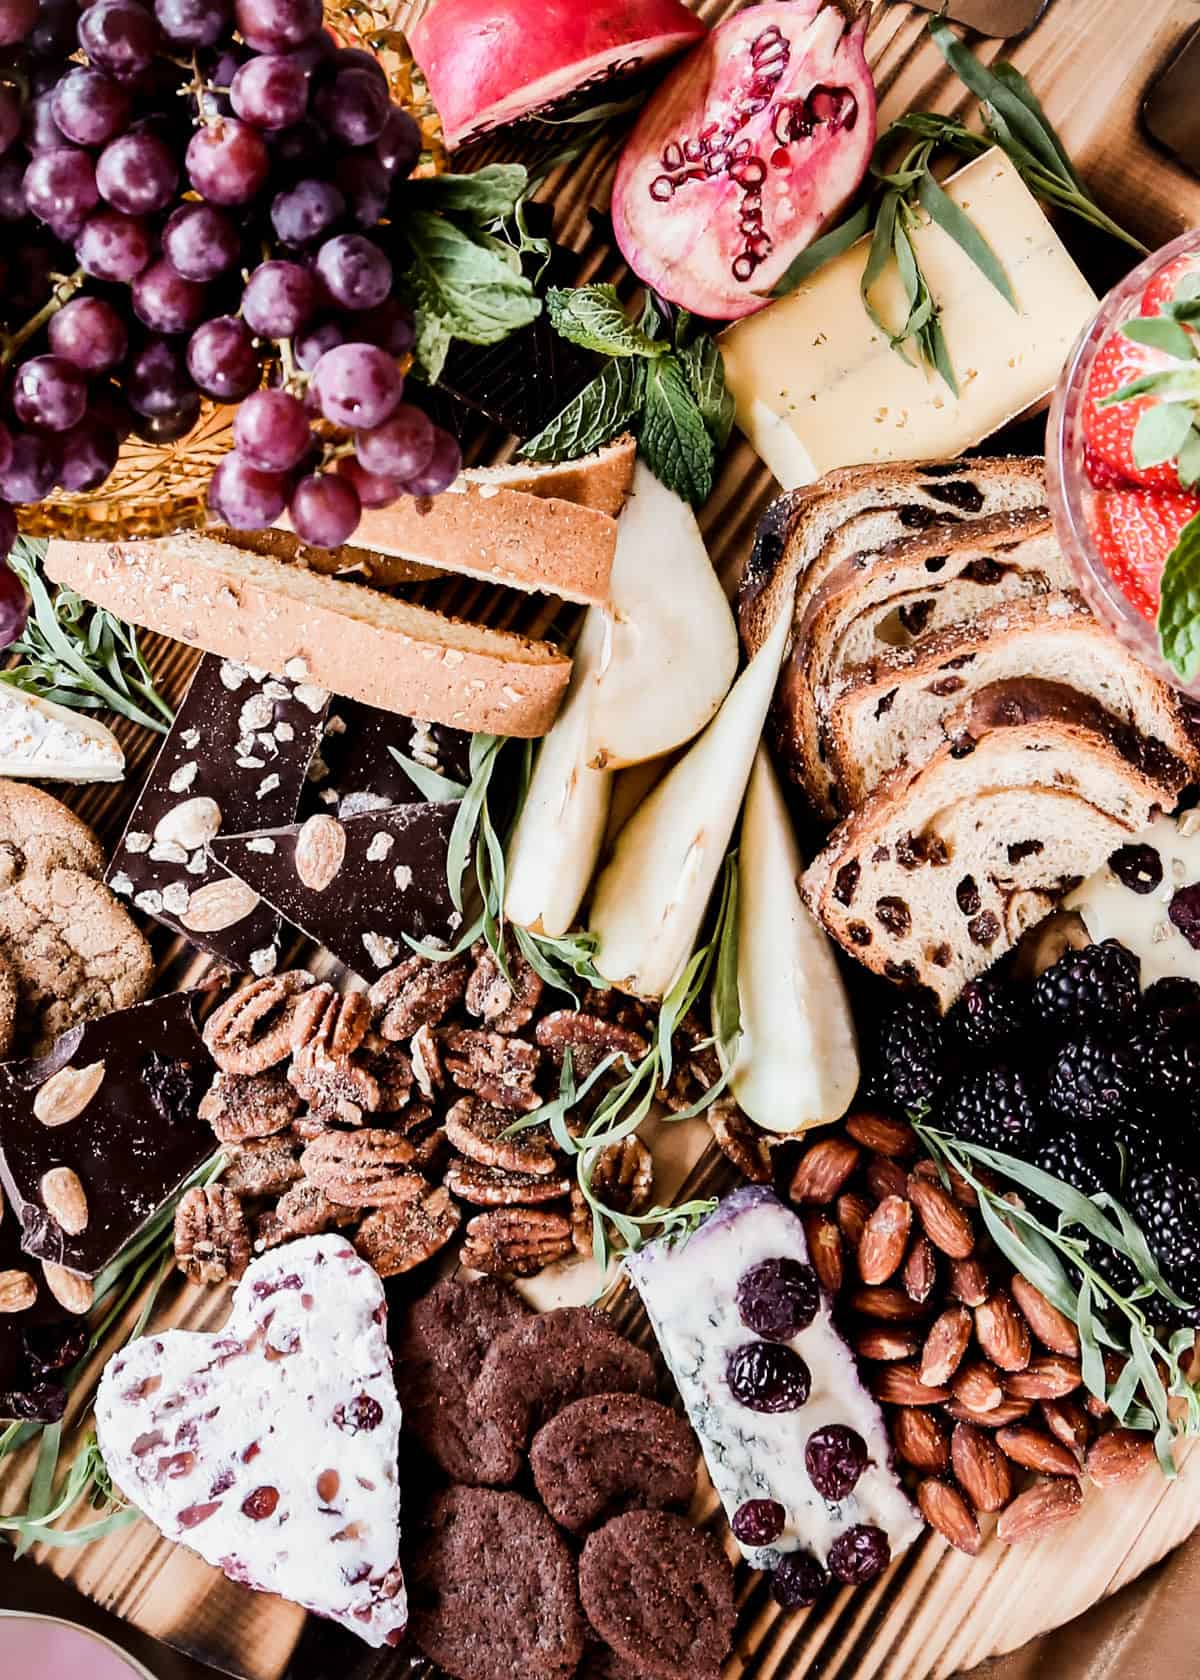 chocolate, fruit, nuts, cookies and cheese clustered on charcuterie board.